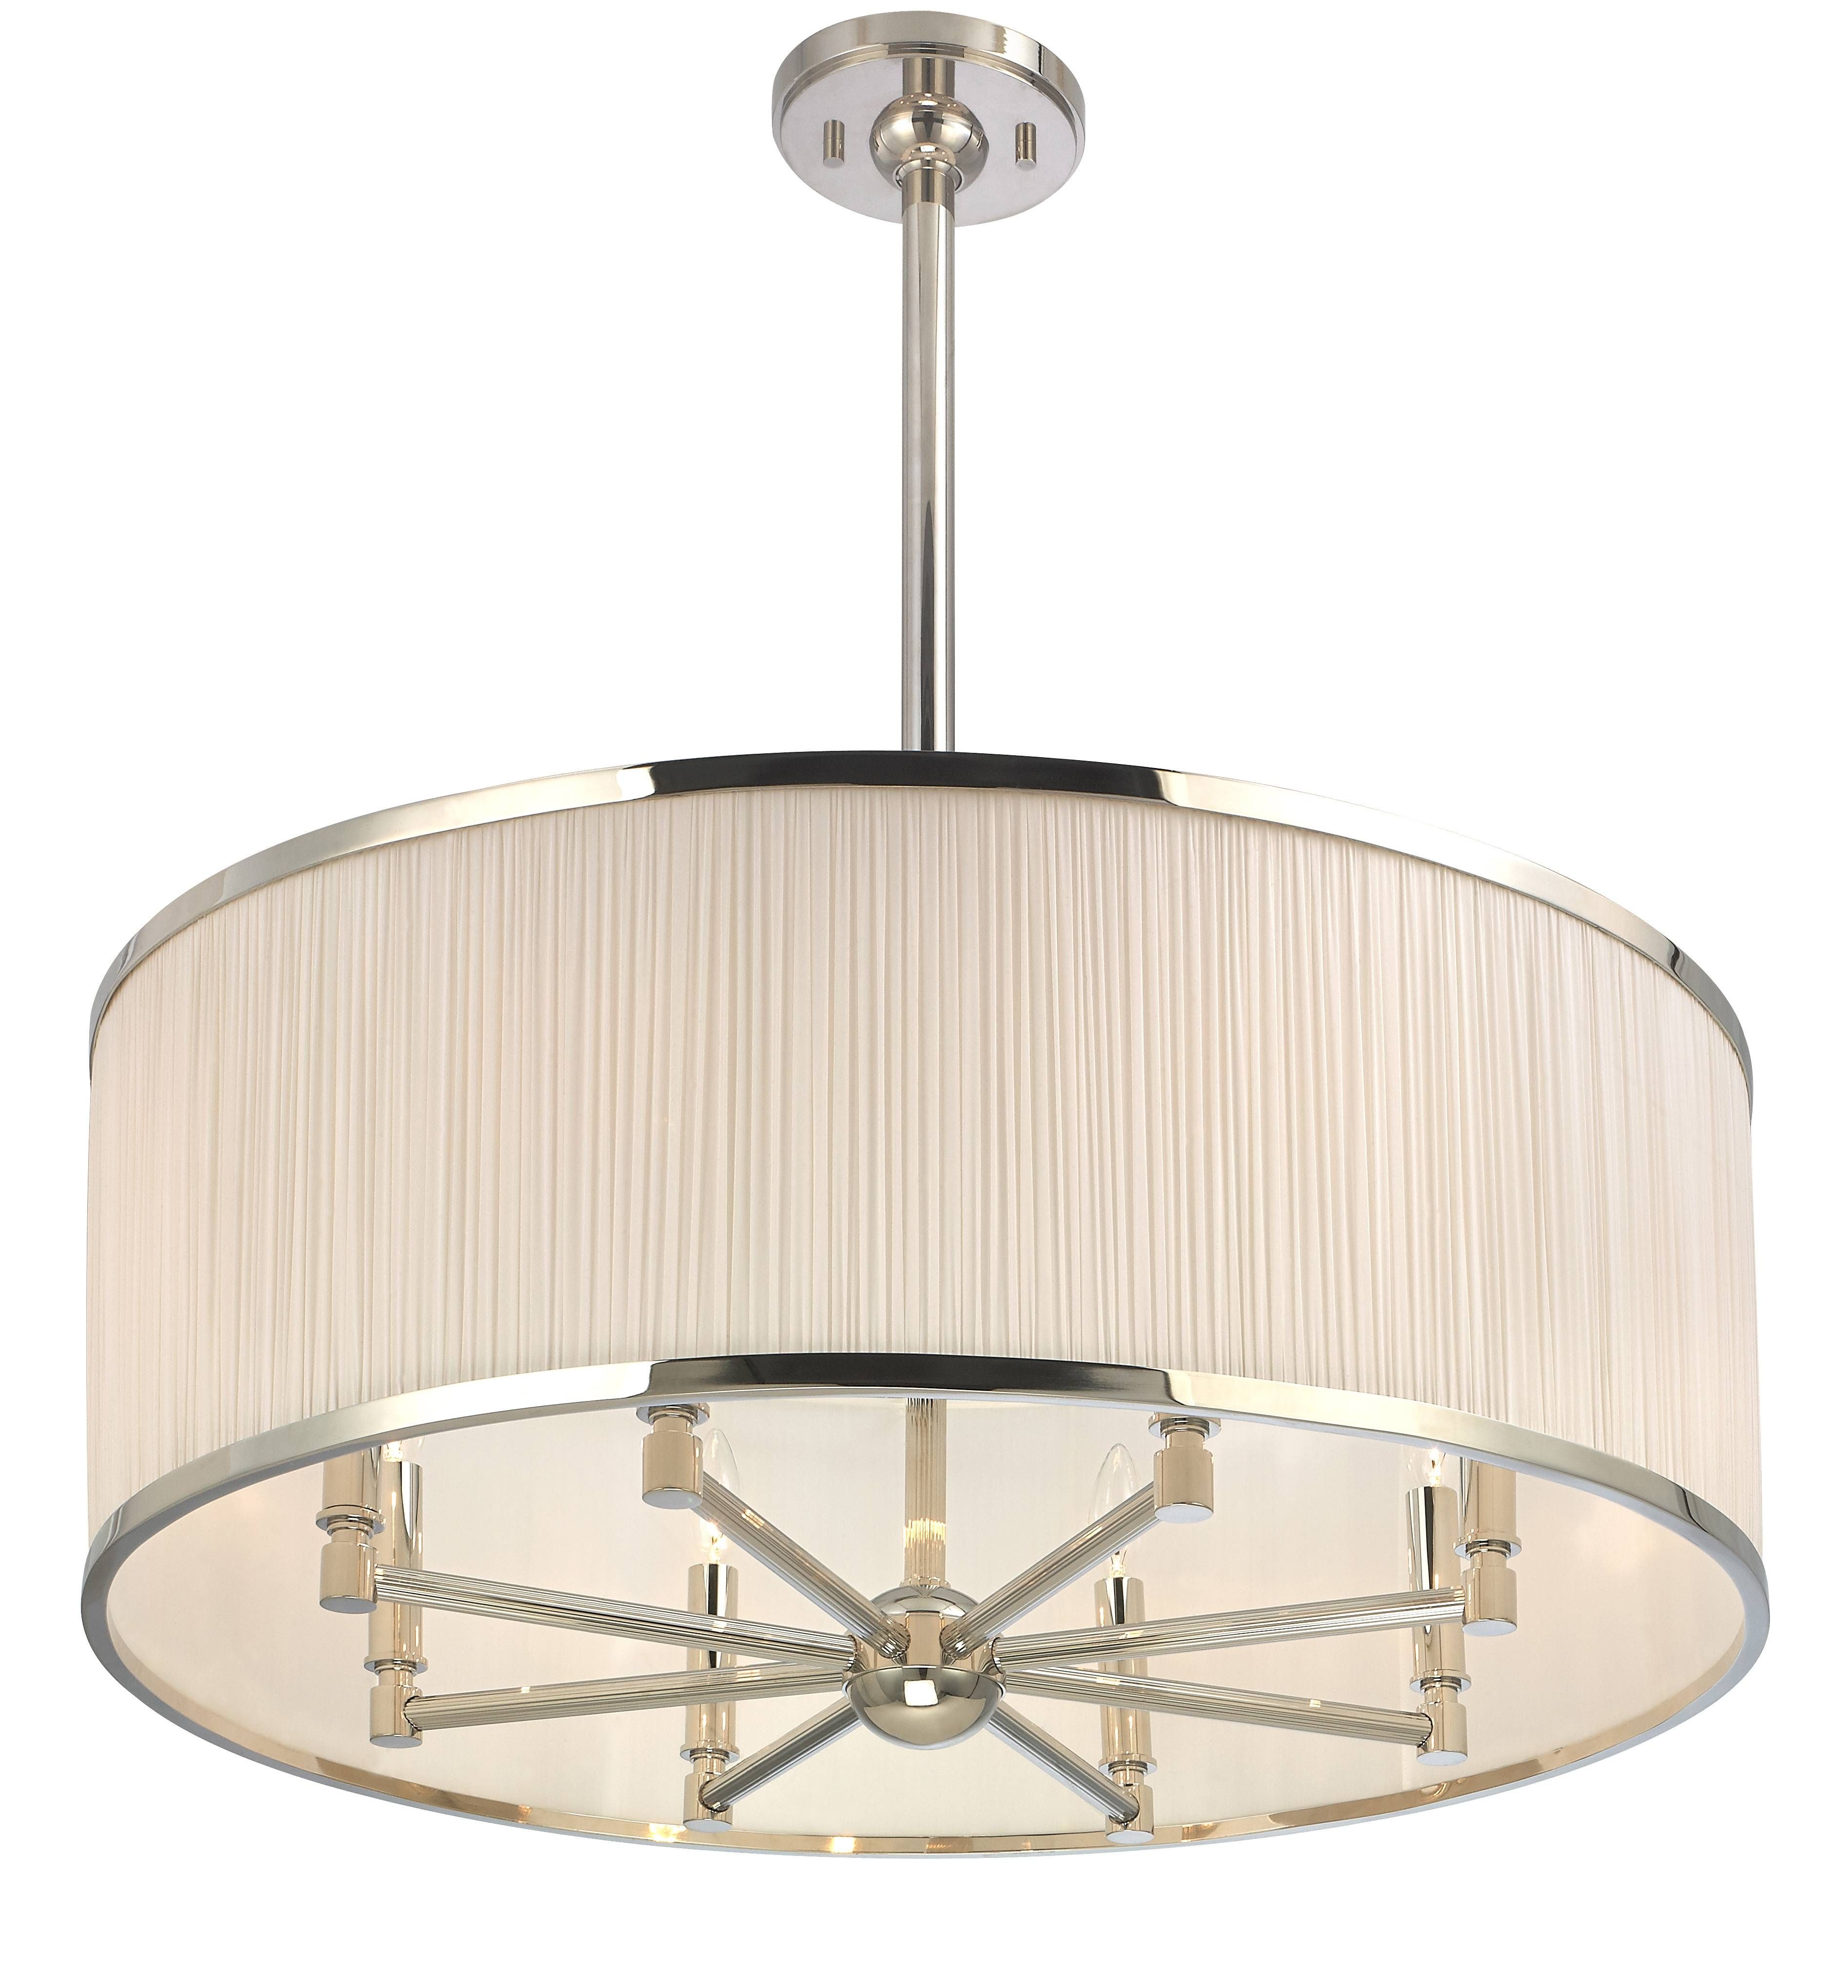 Awesome Drum Ceiling Light 89 On Screw In Pendant Light Fixtures In Screw In Pendant Lights (View 13 of 15)